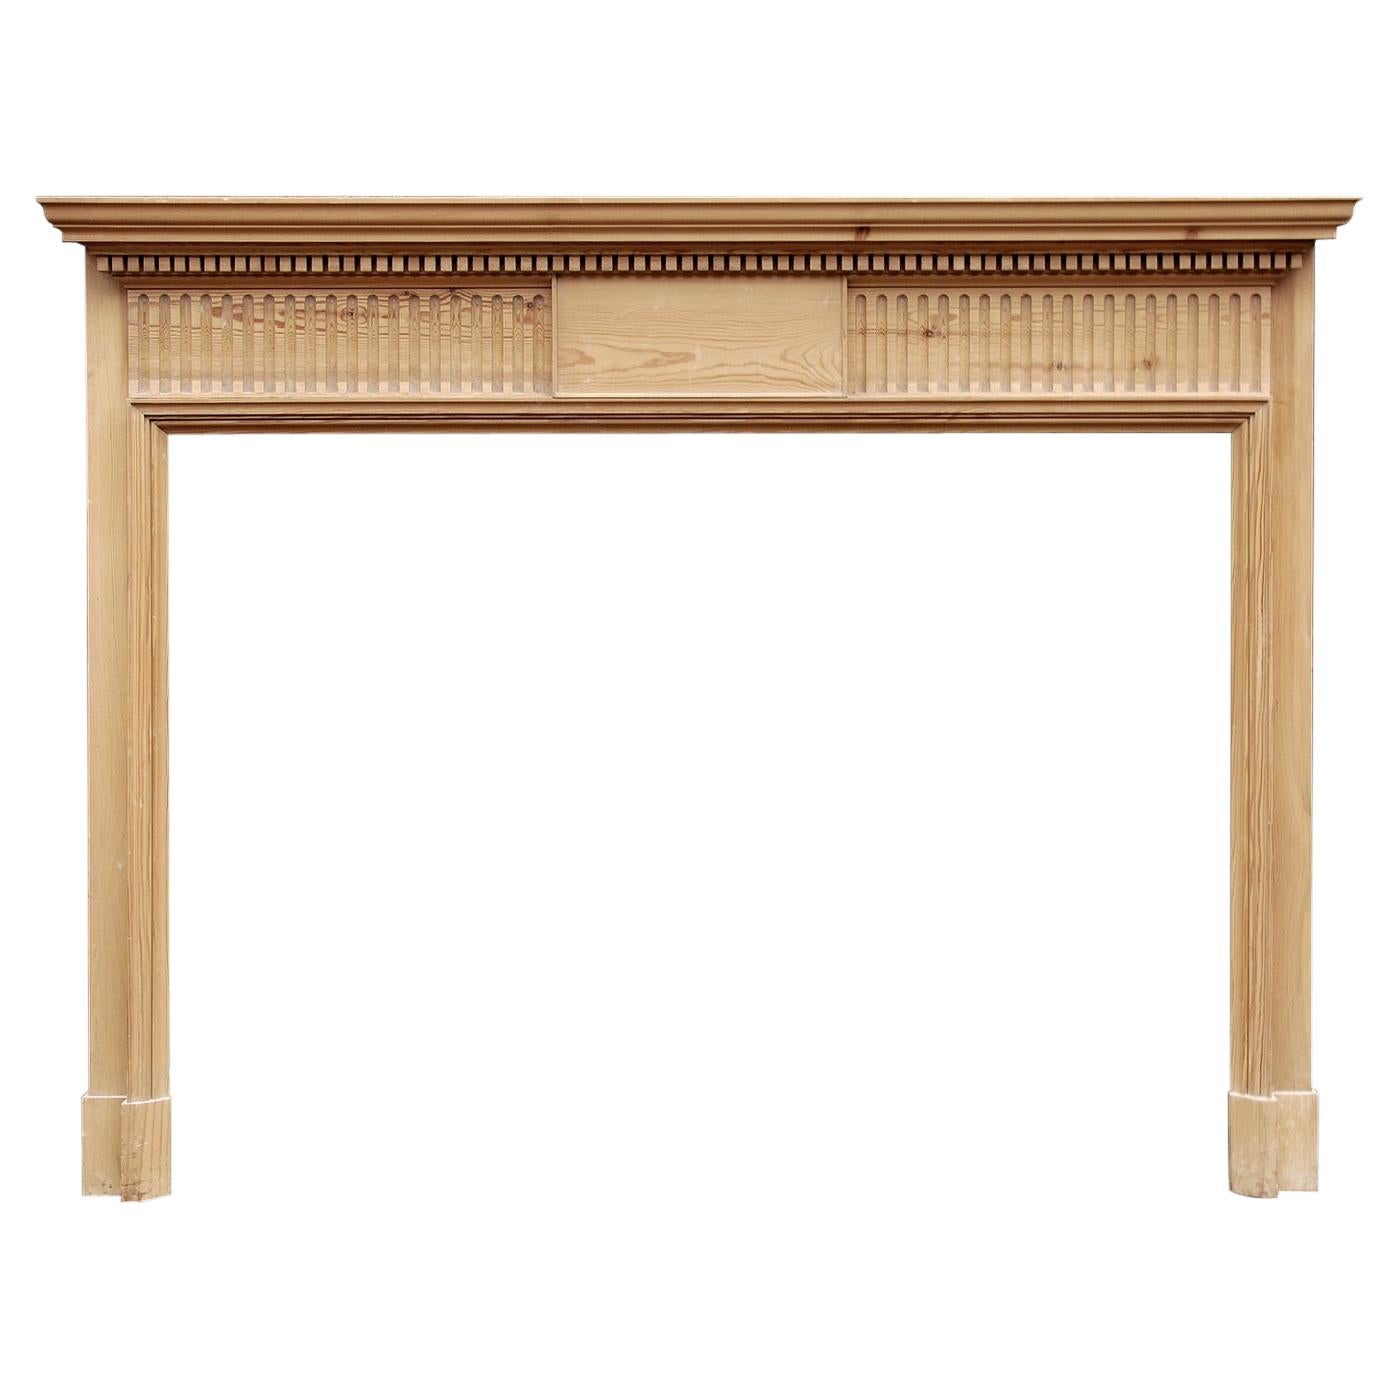 English Pine Fireplace with Fluted Frieze